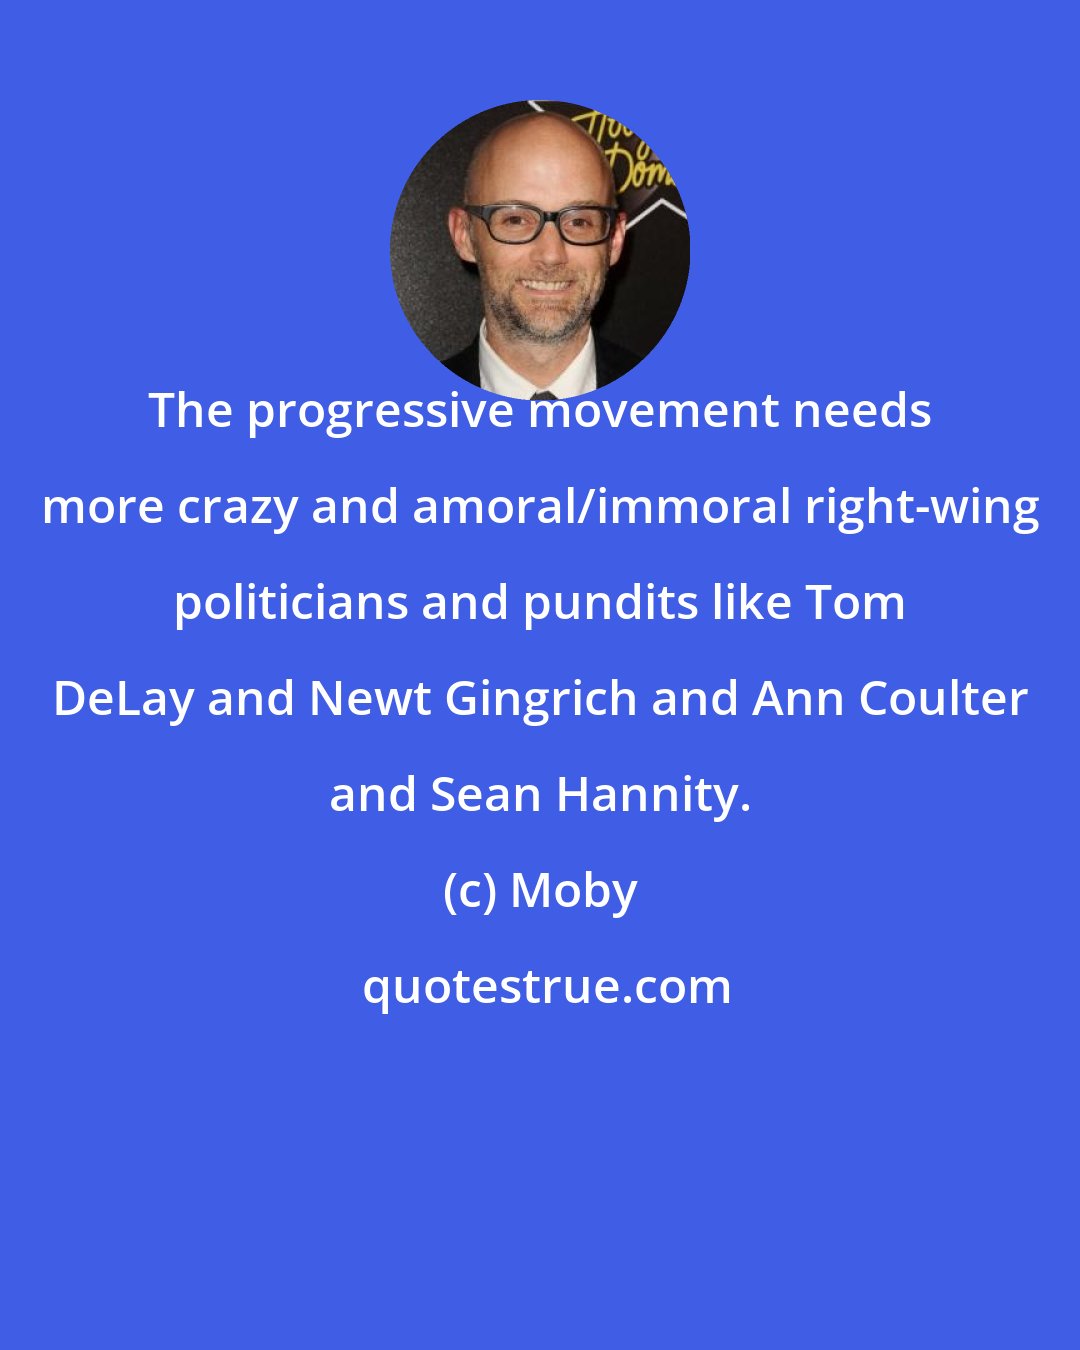 Moby: The progressive movement needs more crazy and amoral/immoral right-wing politicians and pundits like Tom DeLay and Newt Gingrich and Ann Coulter and Sean Hannity.